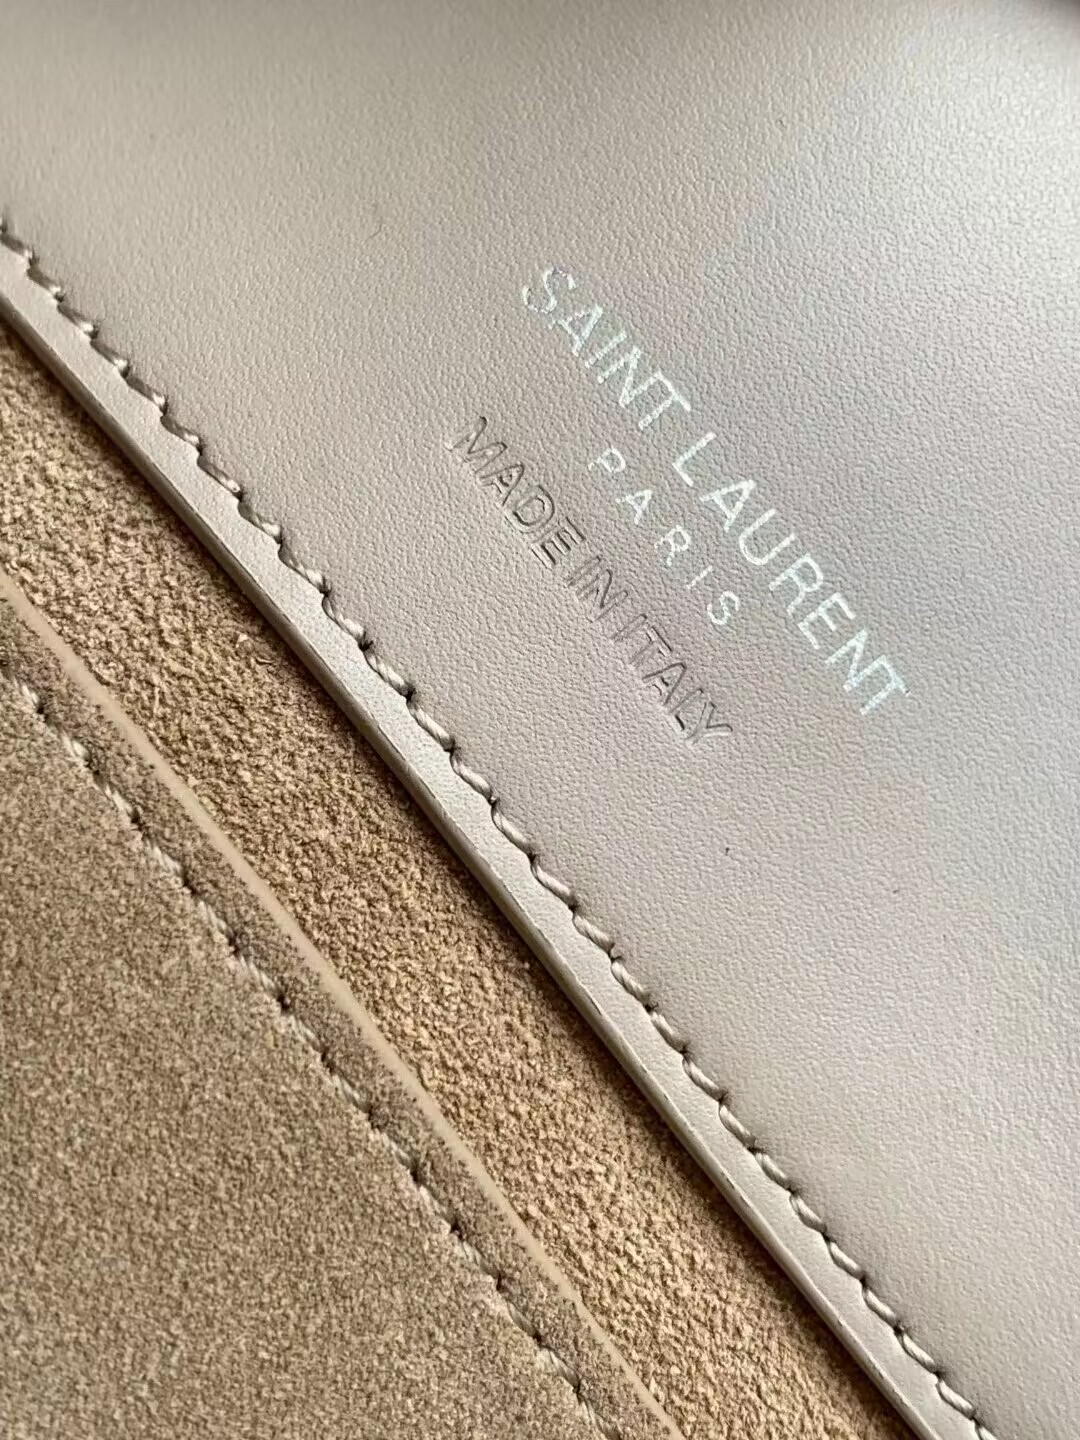 SAINT LAURENT LE 37 SMALL IN SHINY LEATHER 7490362 SEASALT